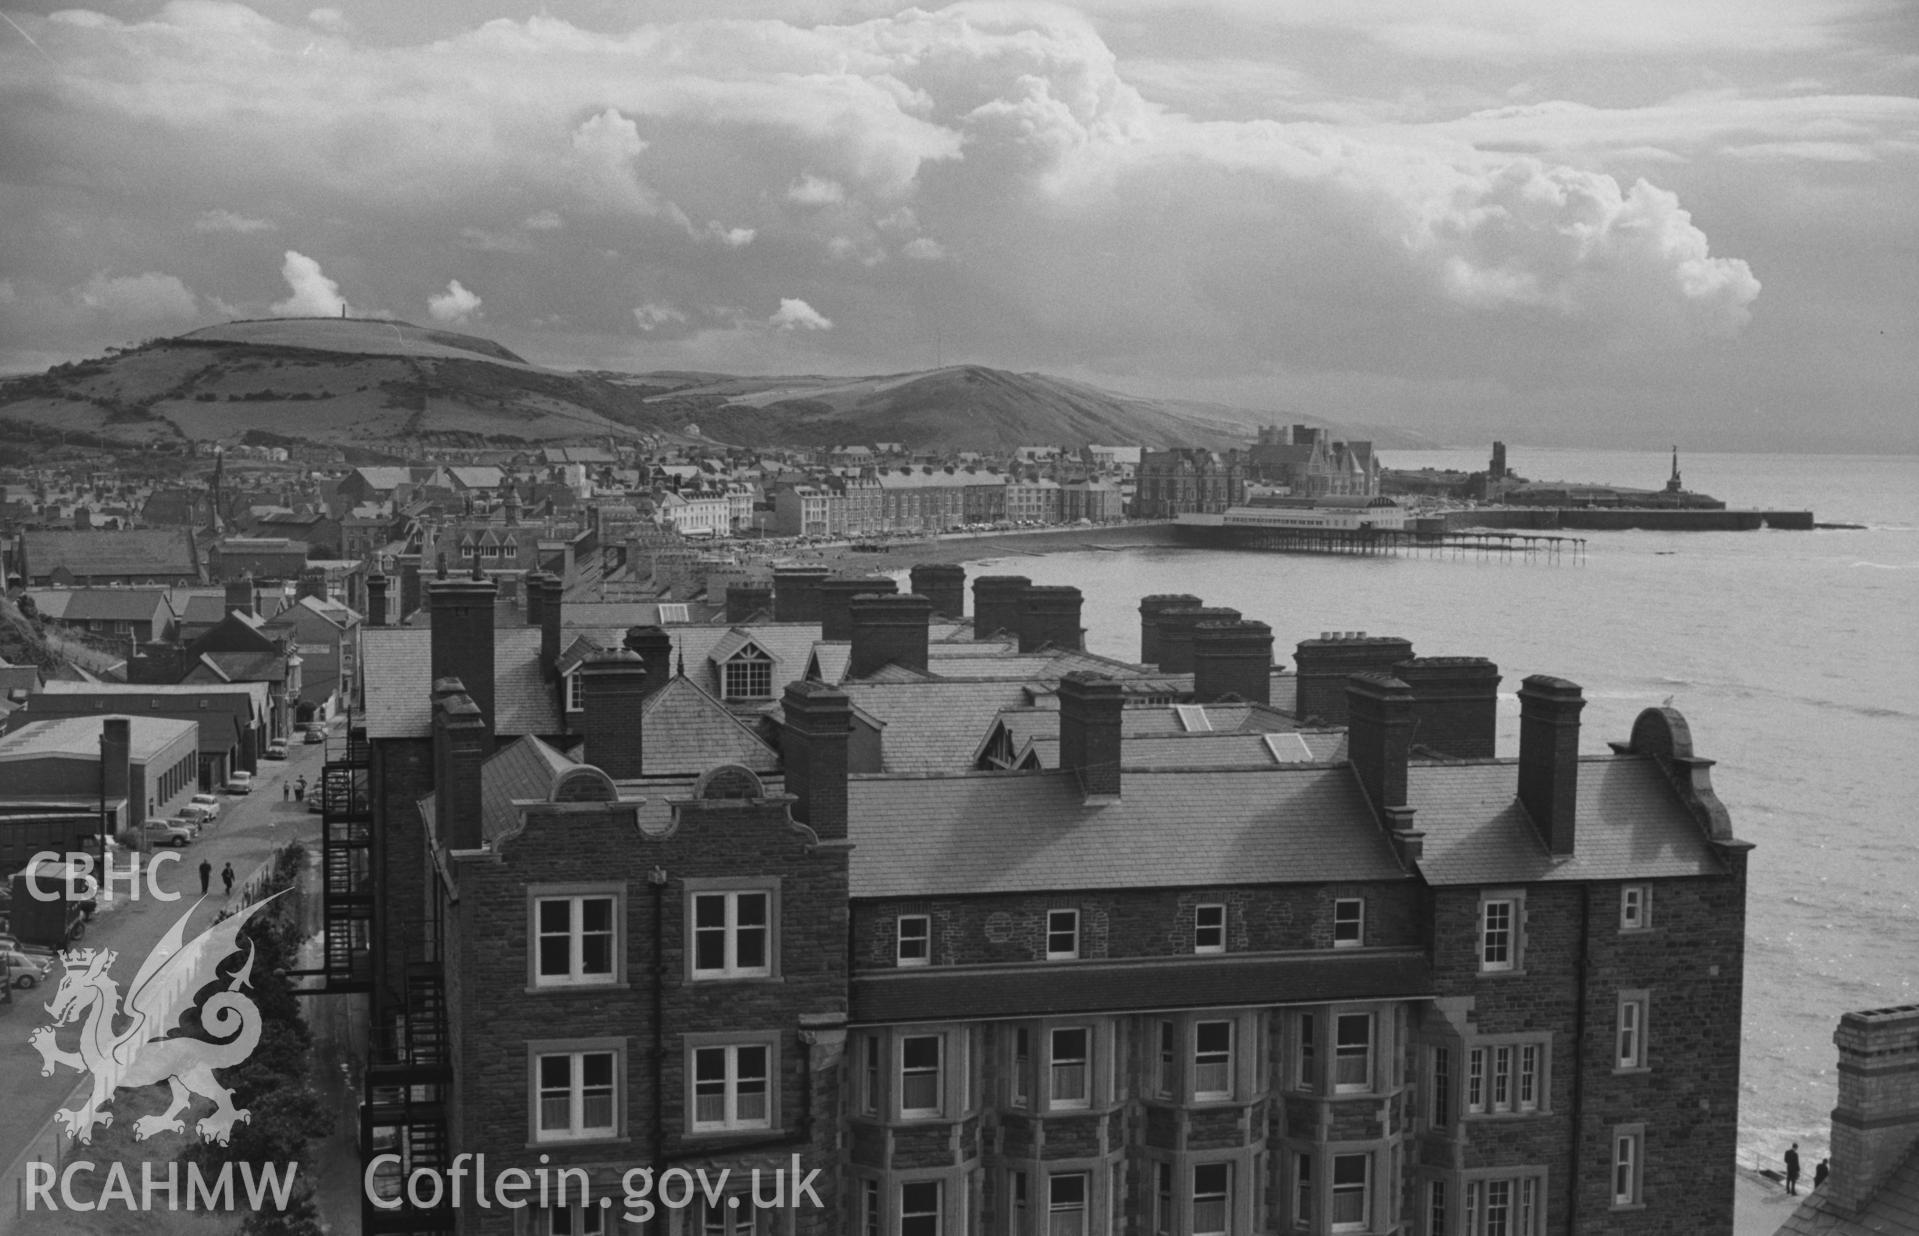 Digital copy of a black and white negative showing views over Aberystwyth from the lower slopes of Constitution Hill with Alexandra Hall in the foreground. Photographed by Arthur O. Chater on 15th August 1967 looking south from Grid Reference SN 583 826.